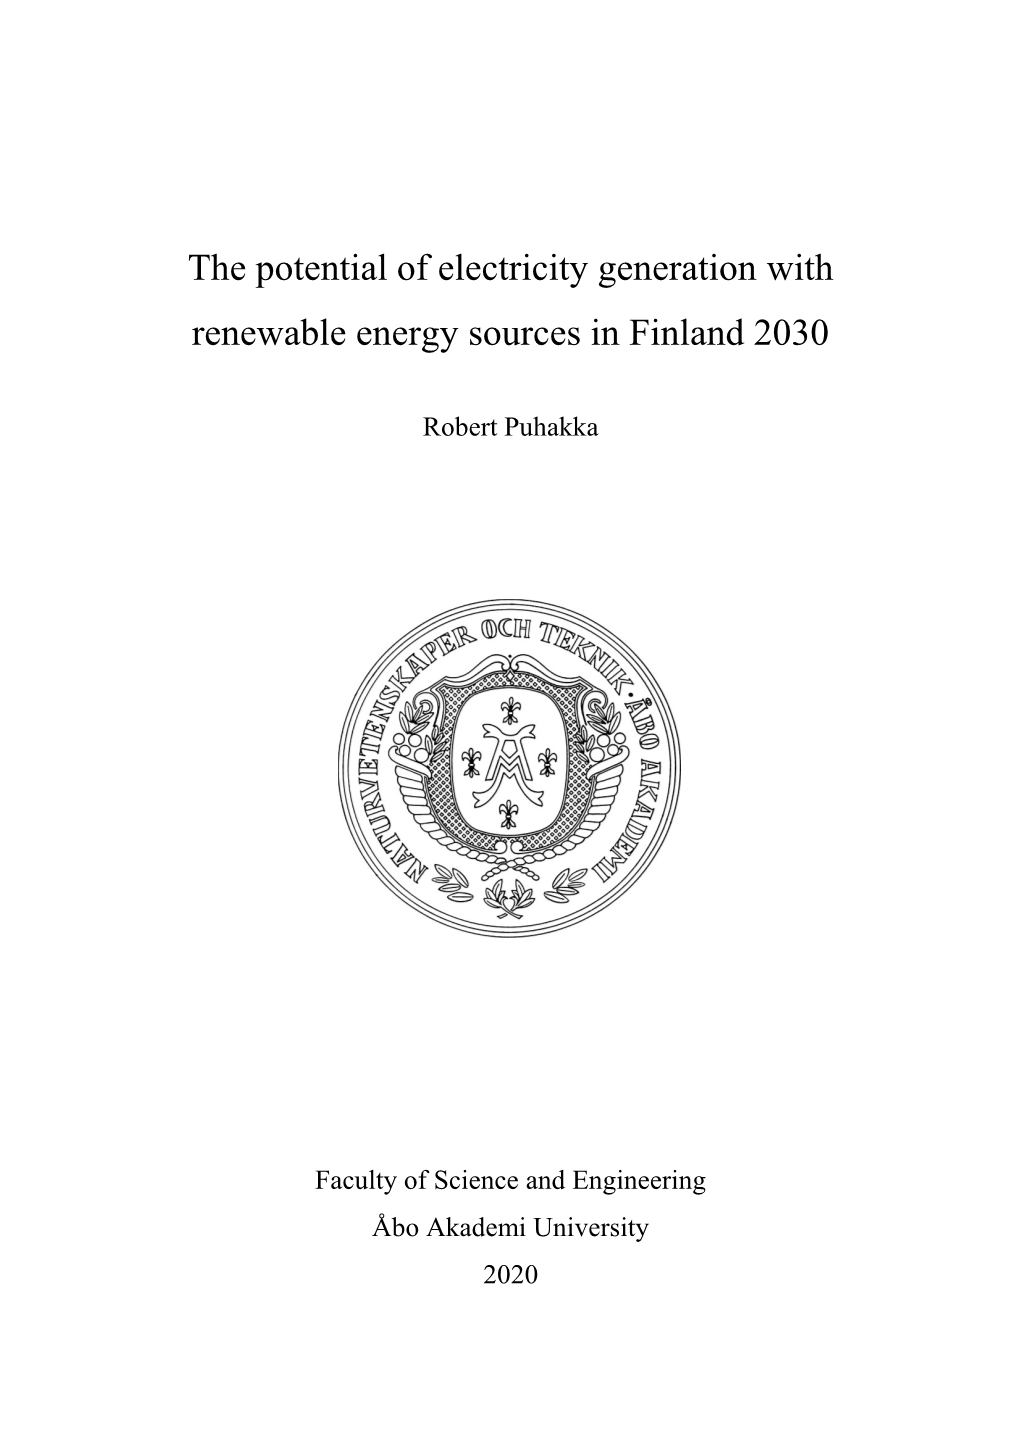 The Potential of Electricity Generation with Renewable Energy Sources in Finland 2030